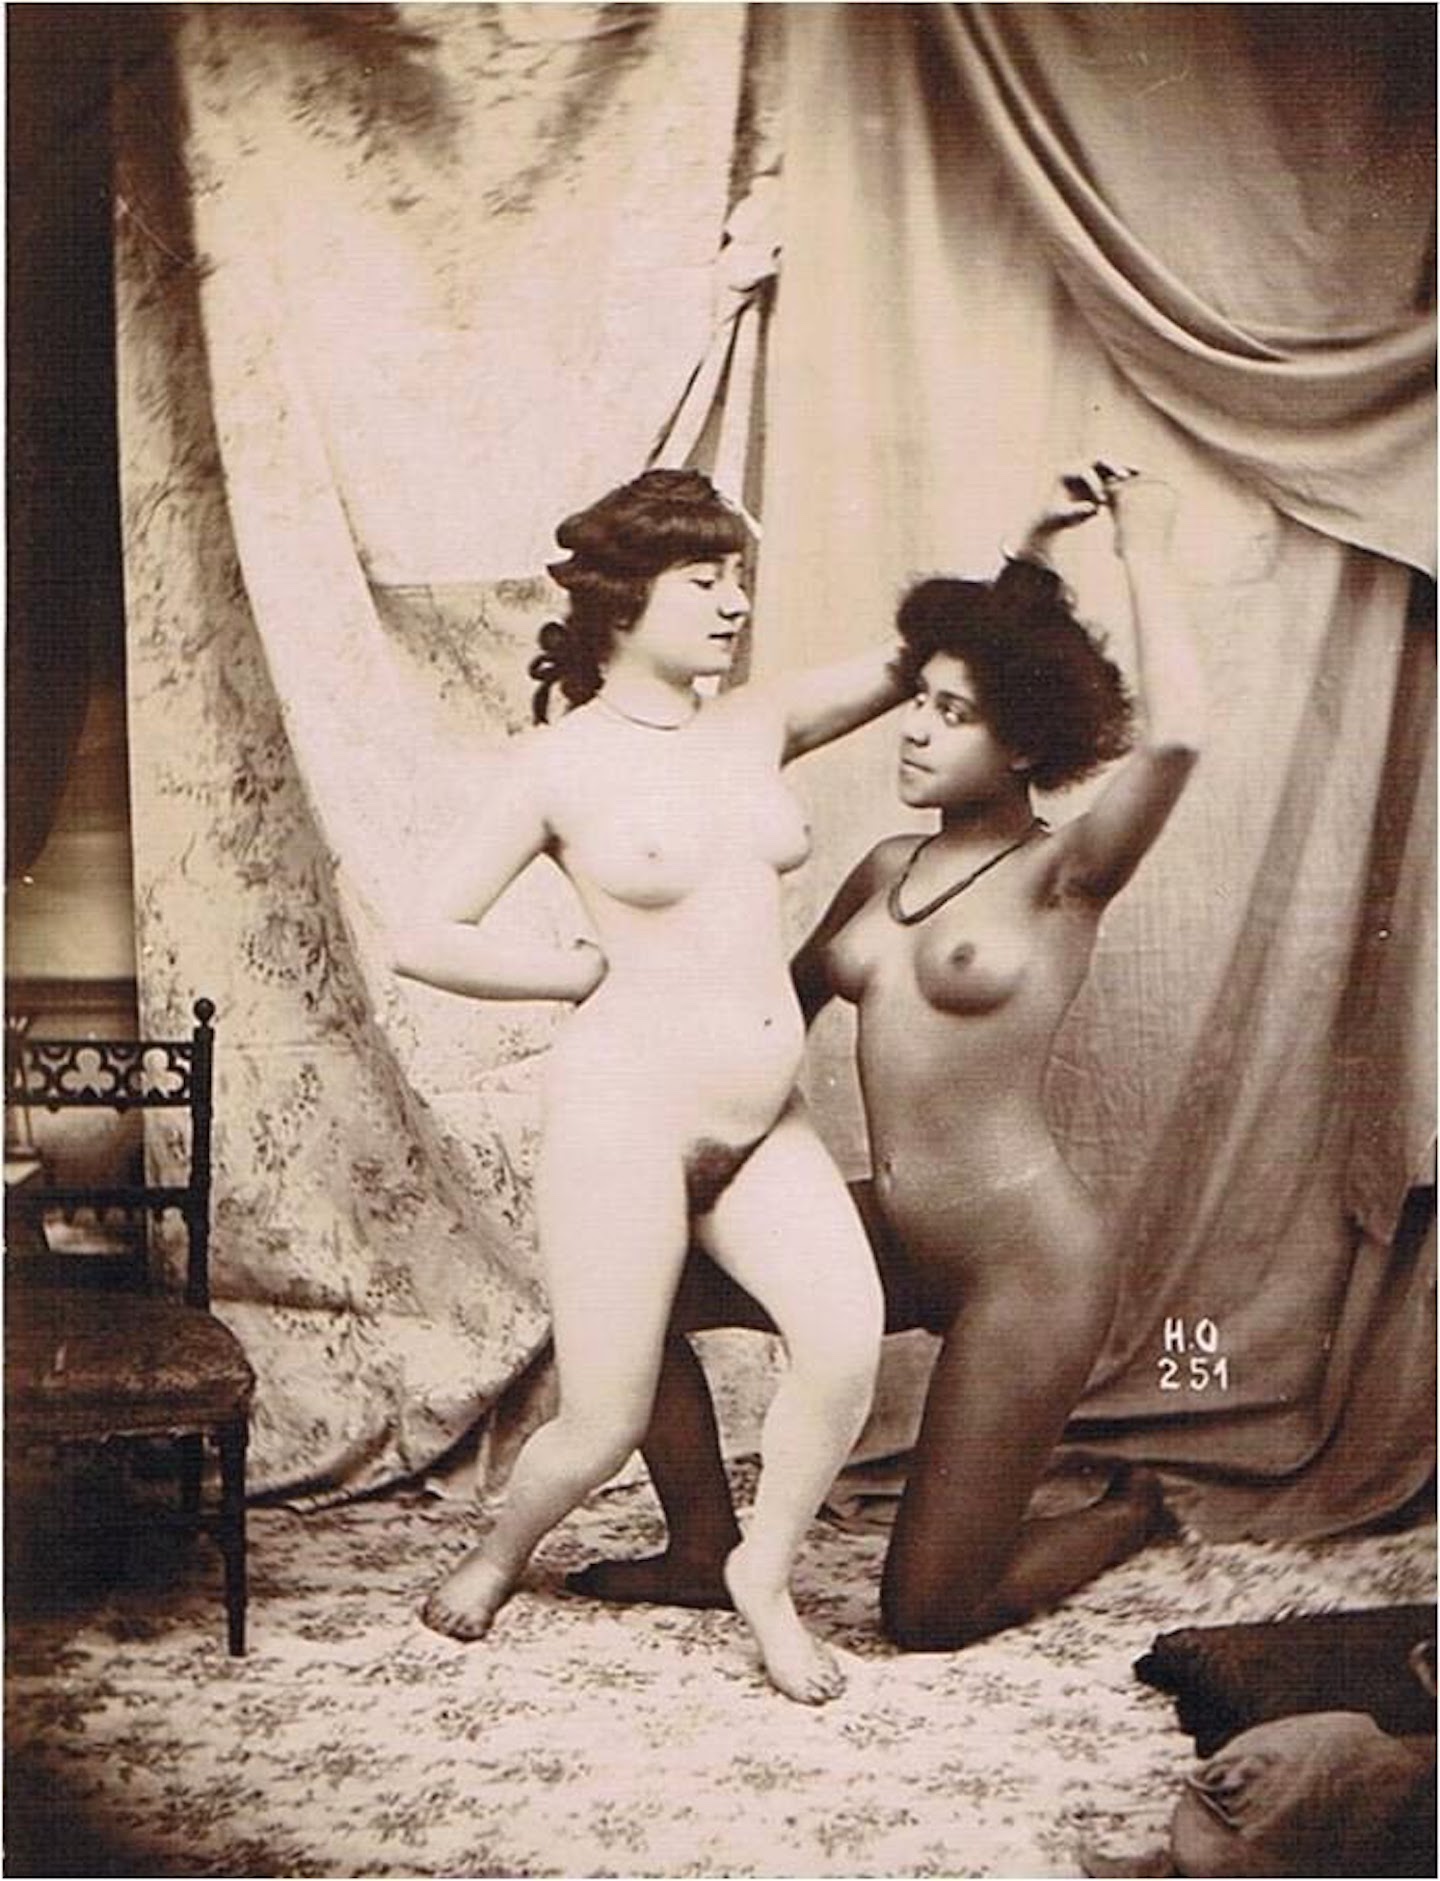 Hd Victorian Porn - The Unbridled Joy of Victorian Porn - VICE